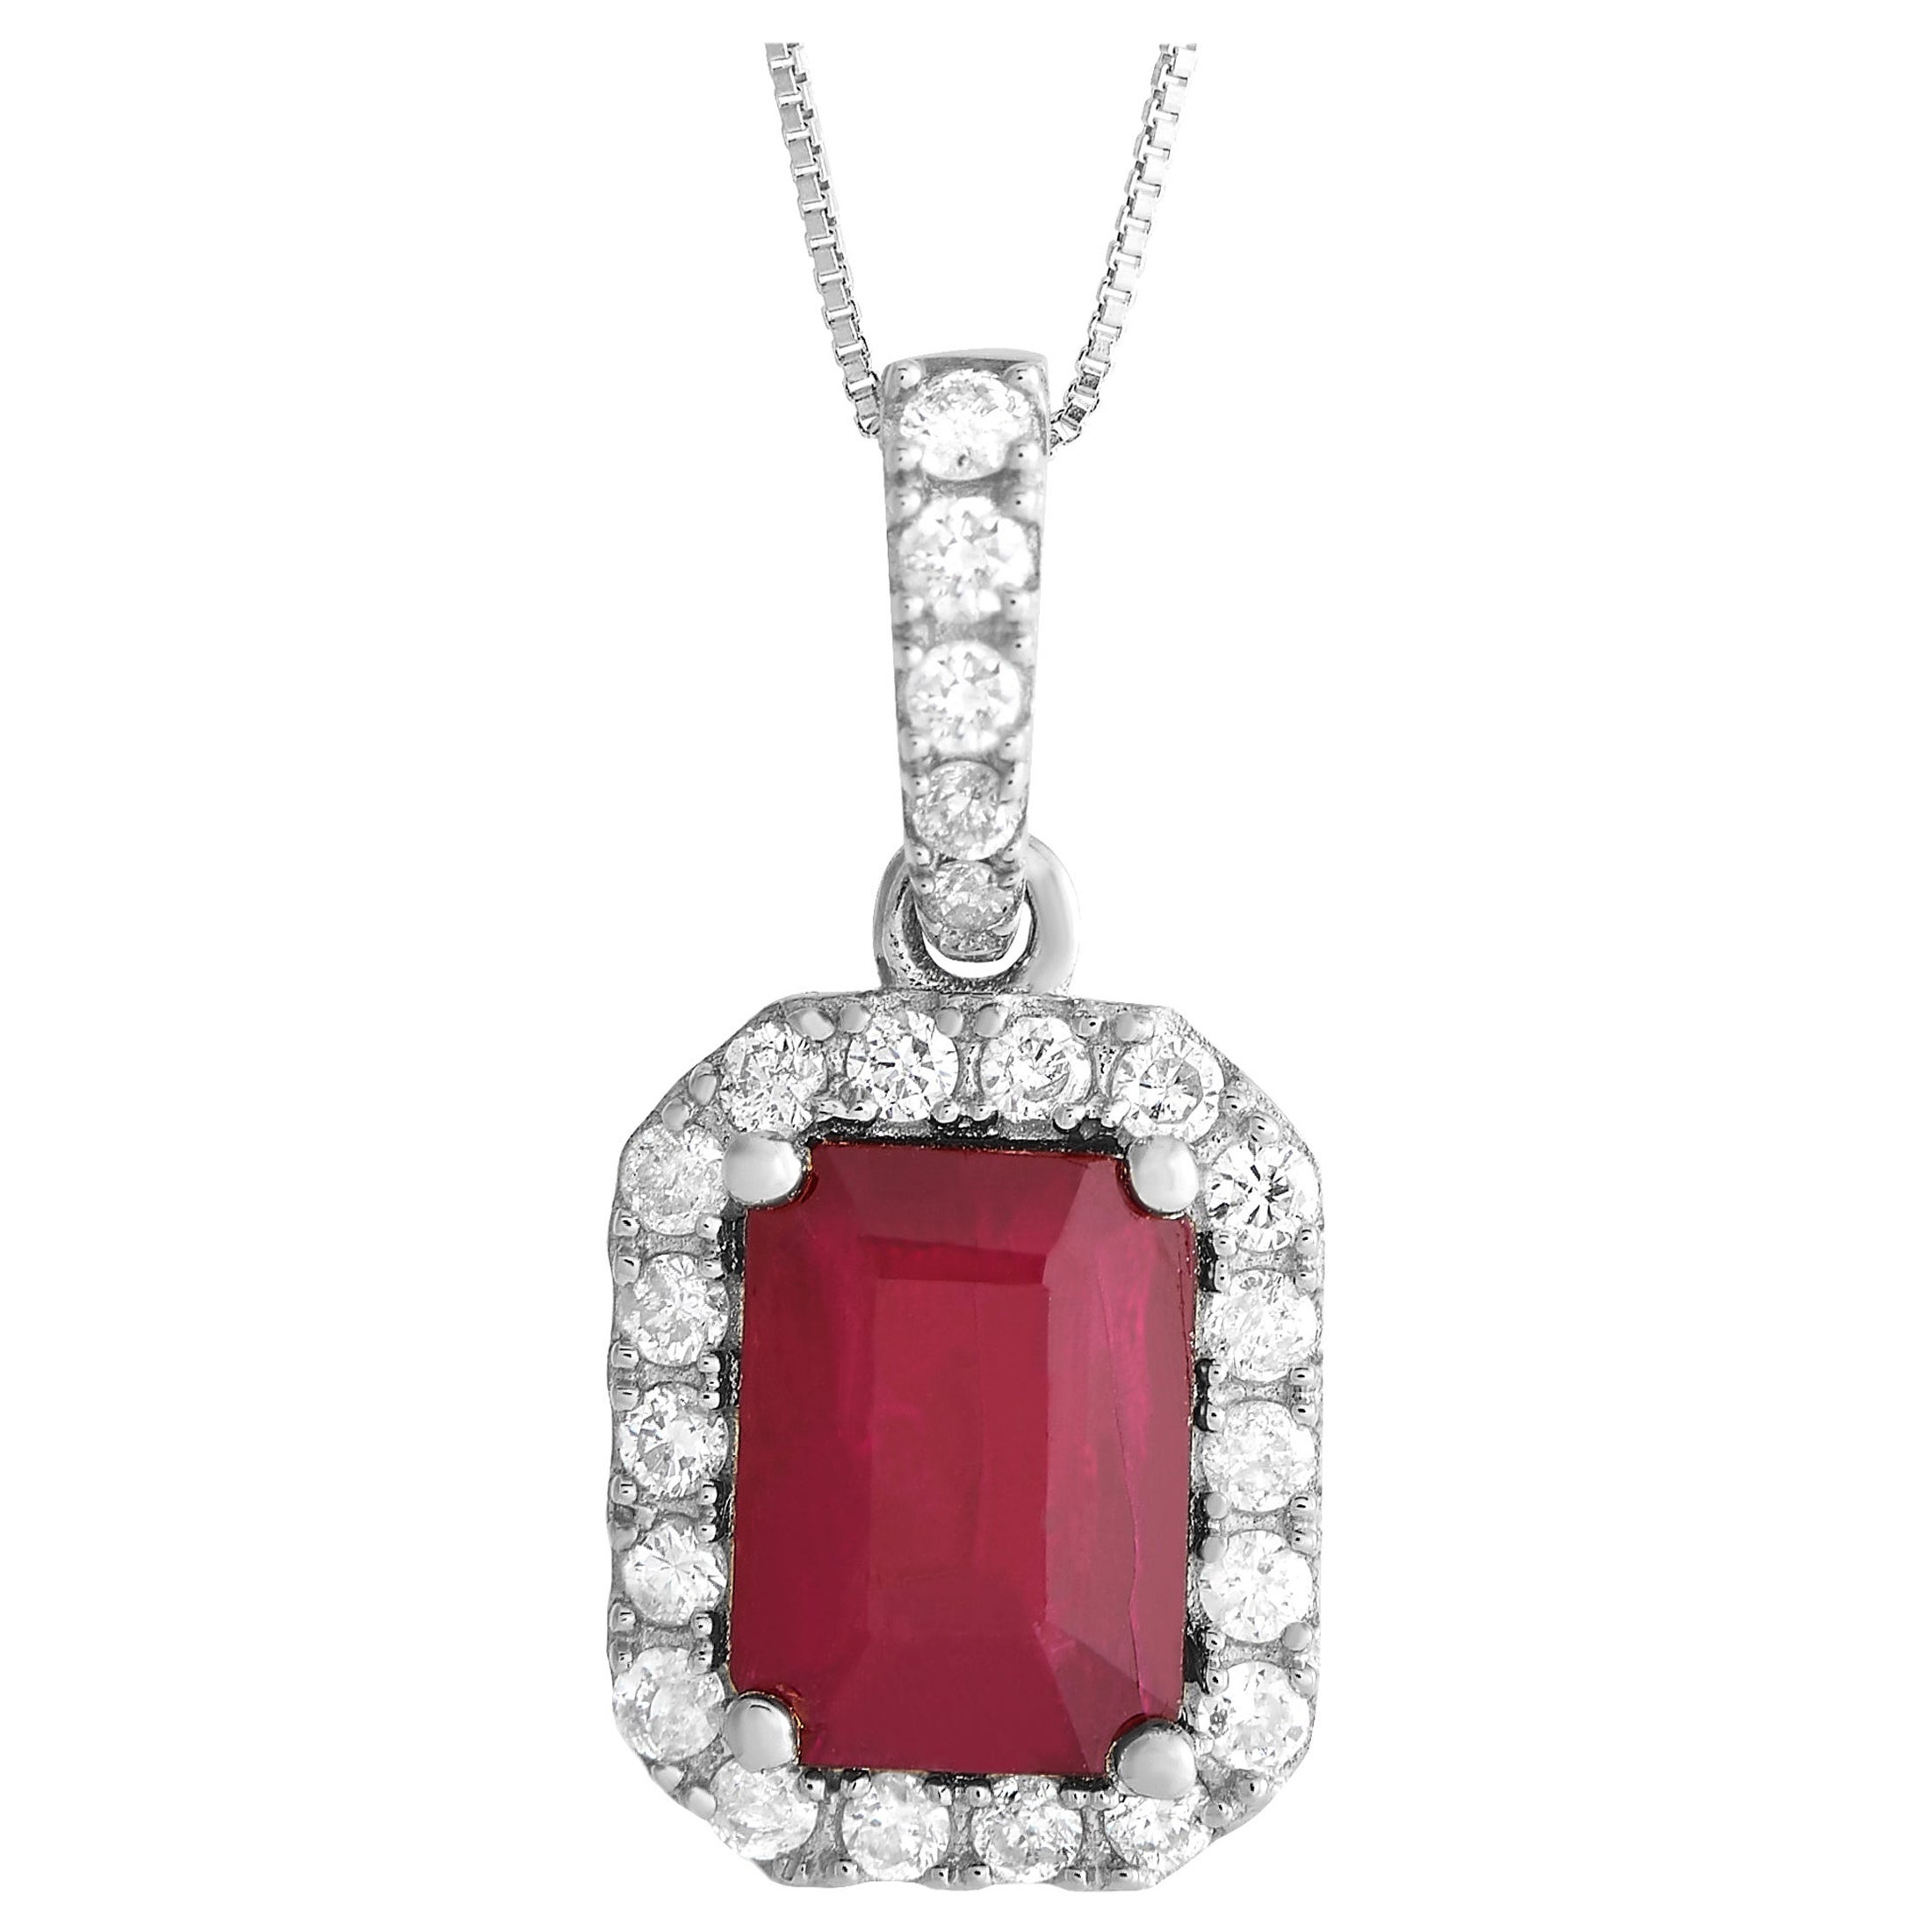 LB Exclusive 14K White Gold 0.20ct Diamond & Ruby Pendant Necklace PD4-15910WRU For Sale